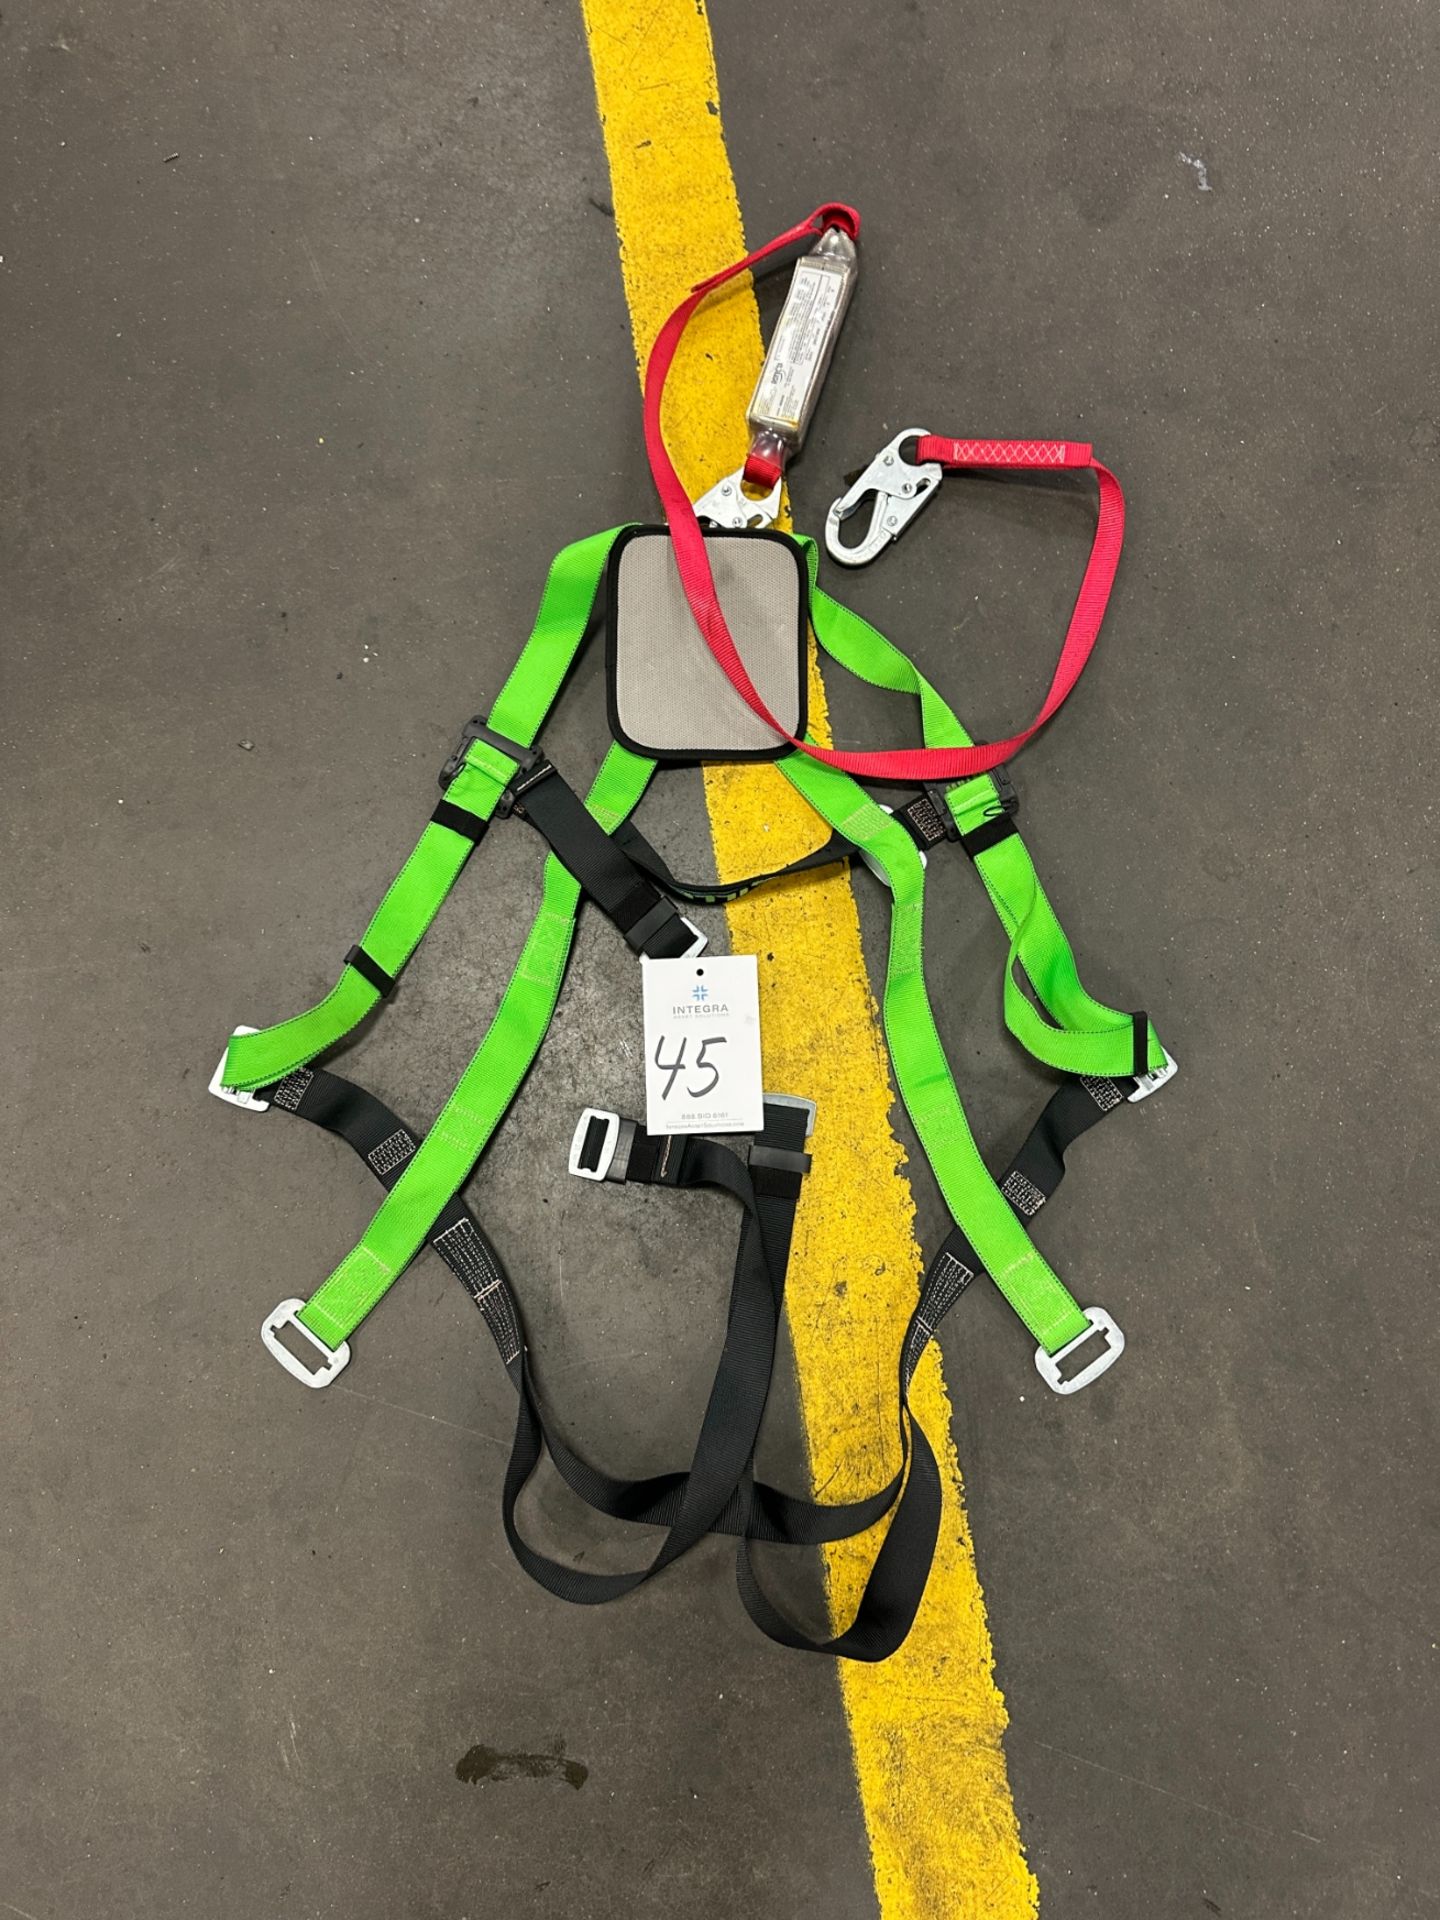 Miller Harness with Protecta Shock Absorbing Lanyard